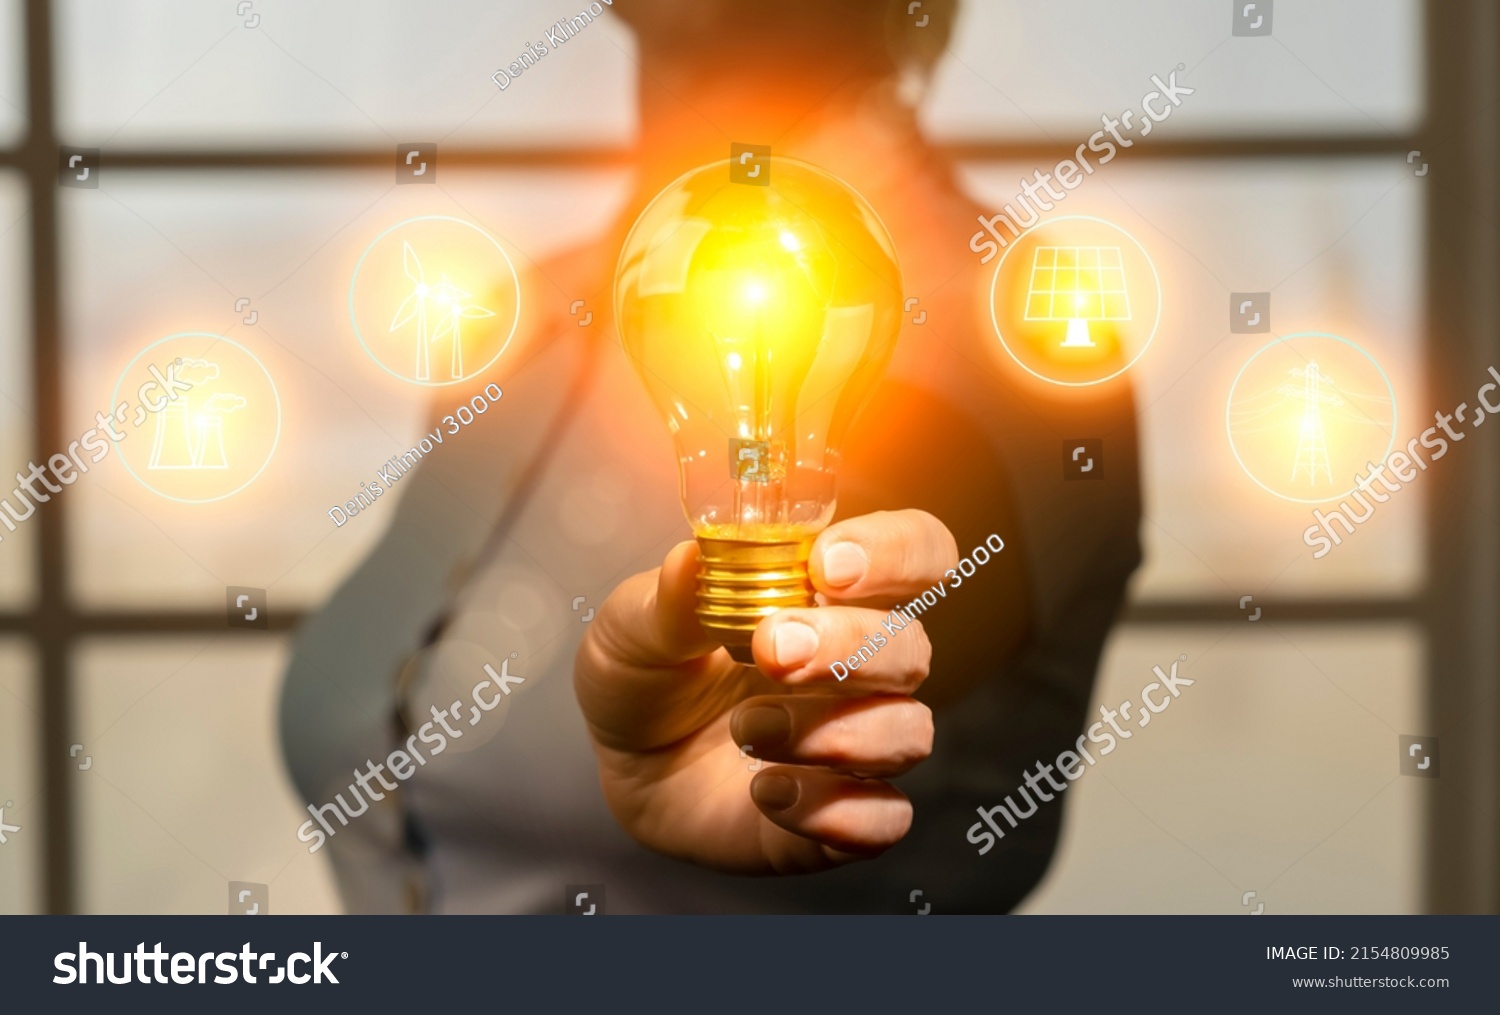 Concept of energy saving, rational use of natural resources and development of renewable energy sources. Woman in hand holding light bulb with electricity generation icons #2154809985